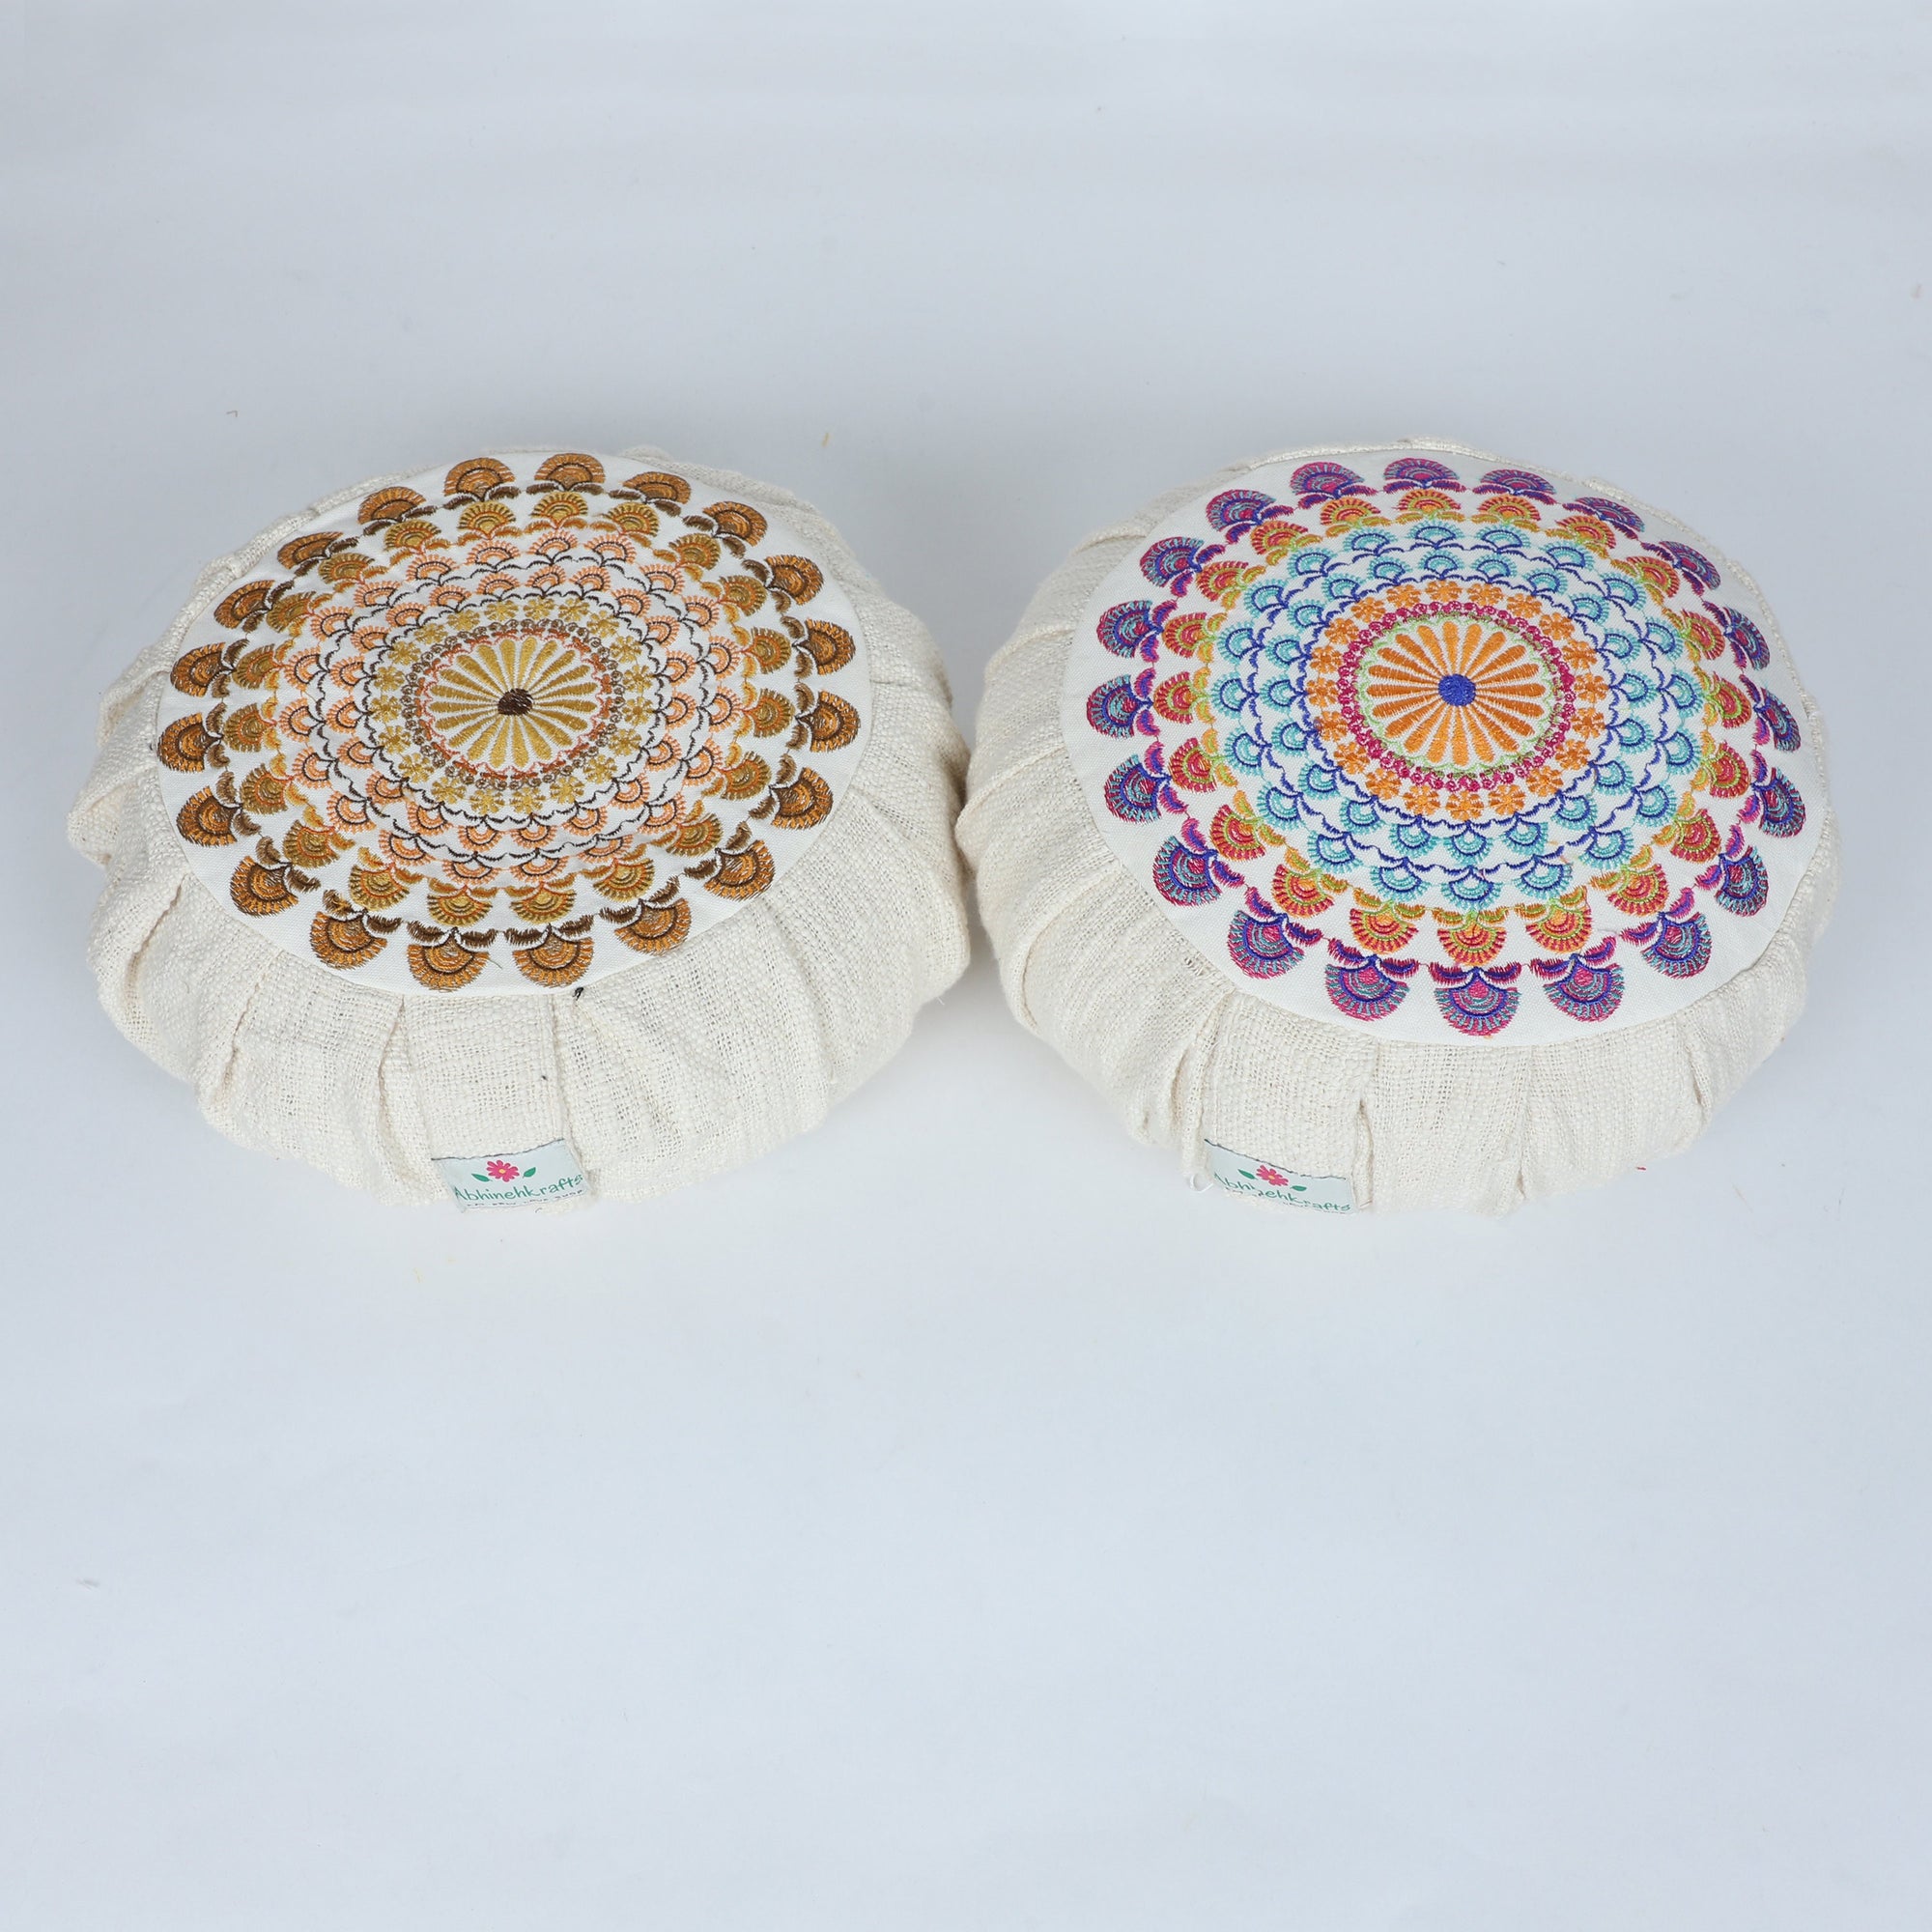 Embroidered Round Zafu Yoga Pillow |Zipped Cover |Washable| Portable - Ananda (Medium) Filling Options